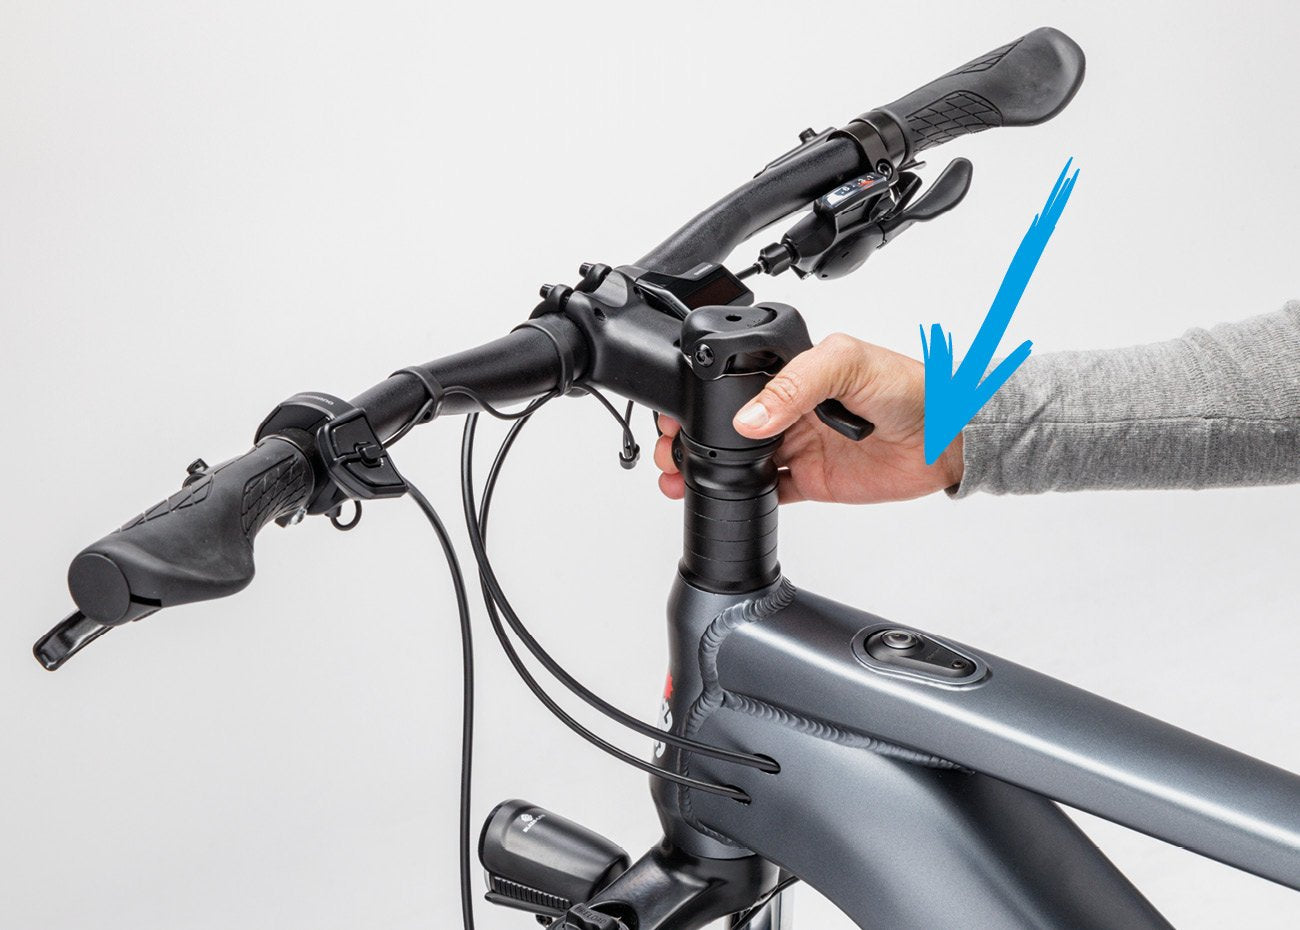 How to tighten the stem of an electric bike